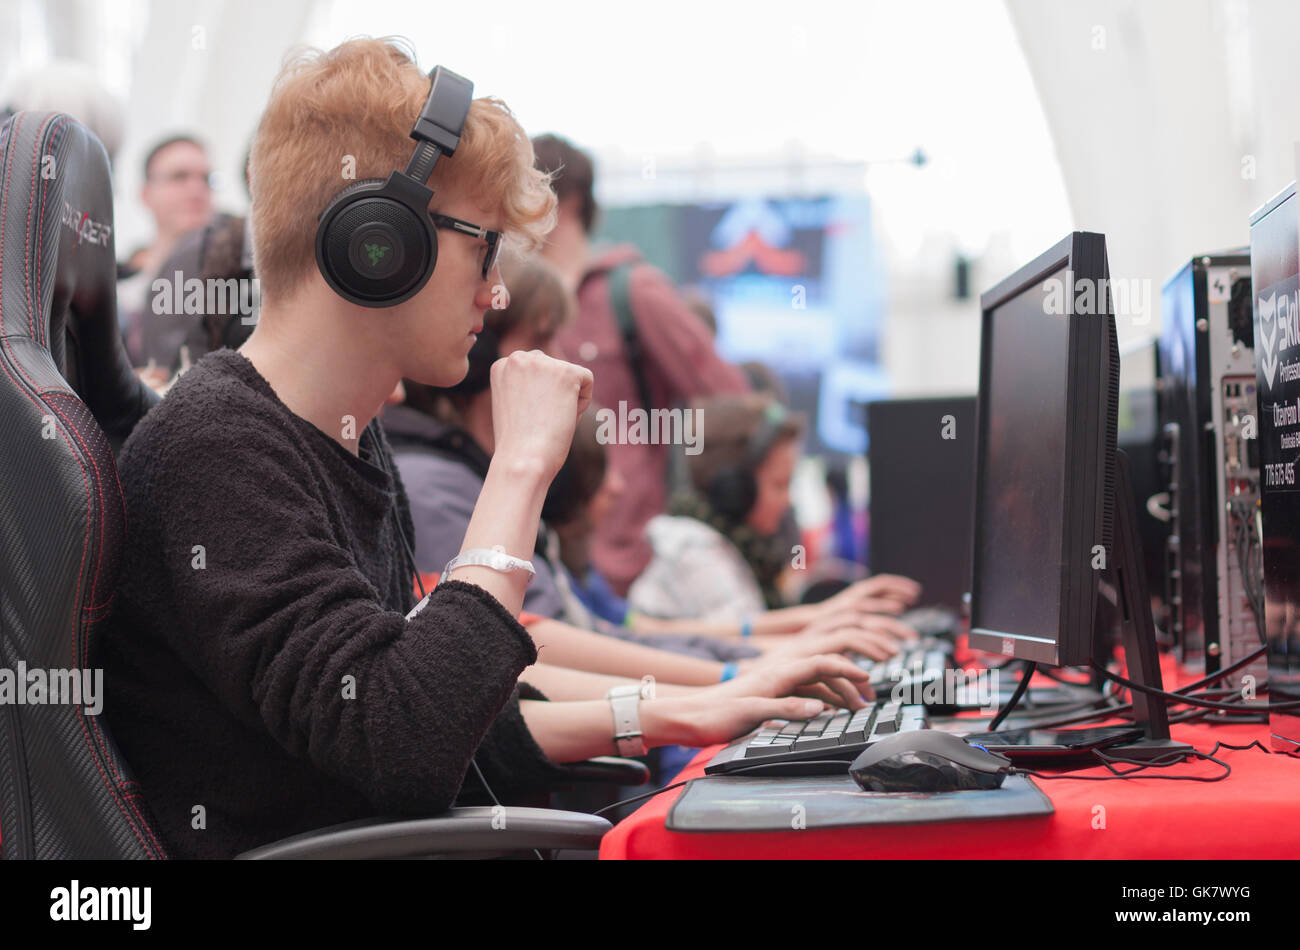 BRNO, CZECH REPUBLIC - APRIL 30, 2016: Young man sits on gaming chair and plays game on PC at Animefest, anime convention Stock Photo